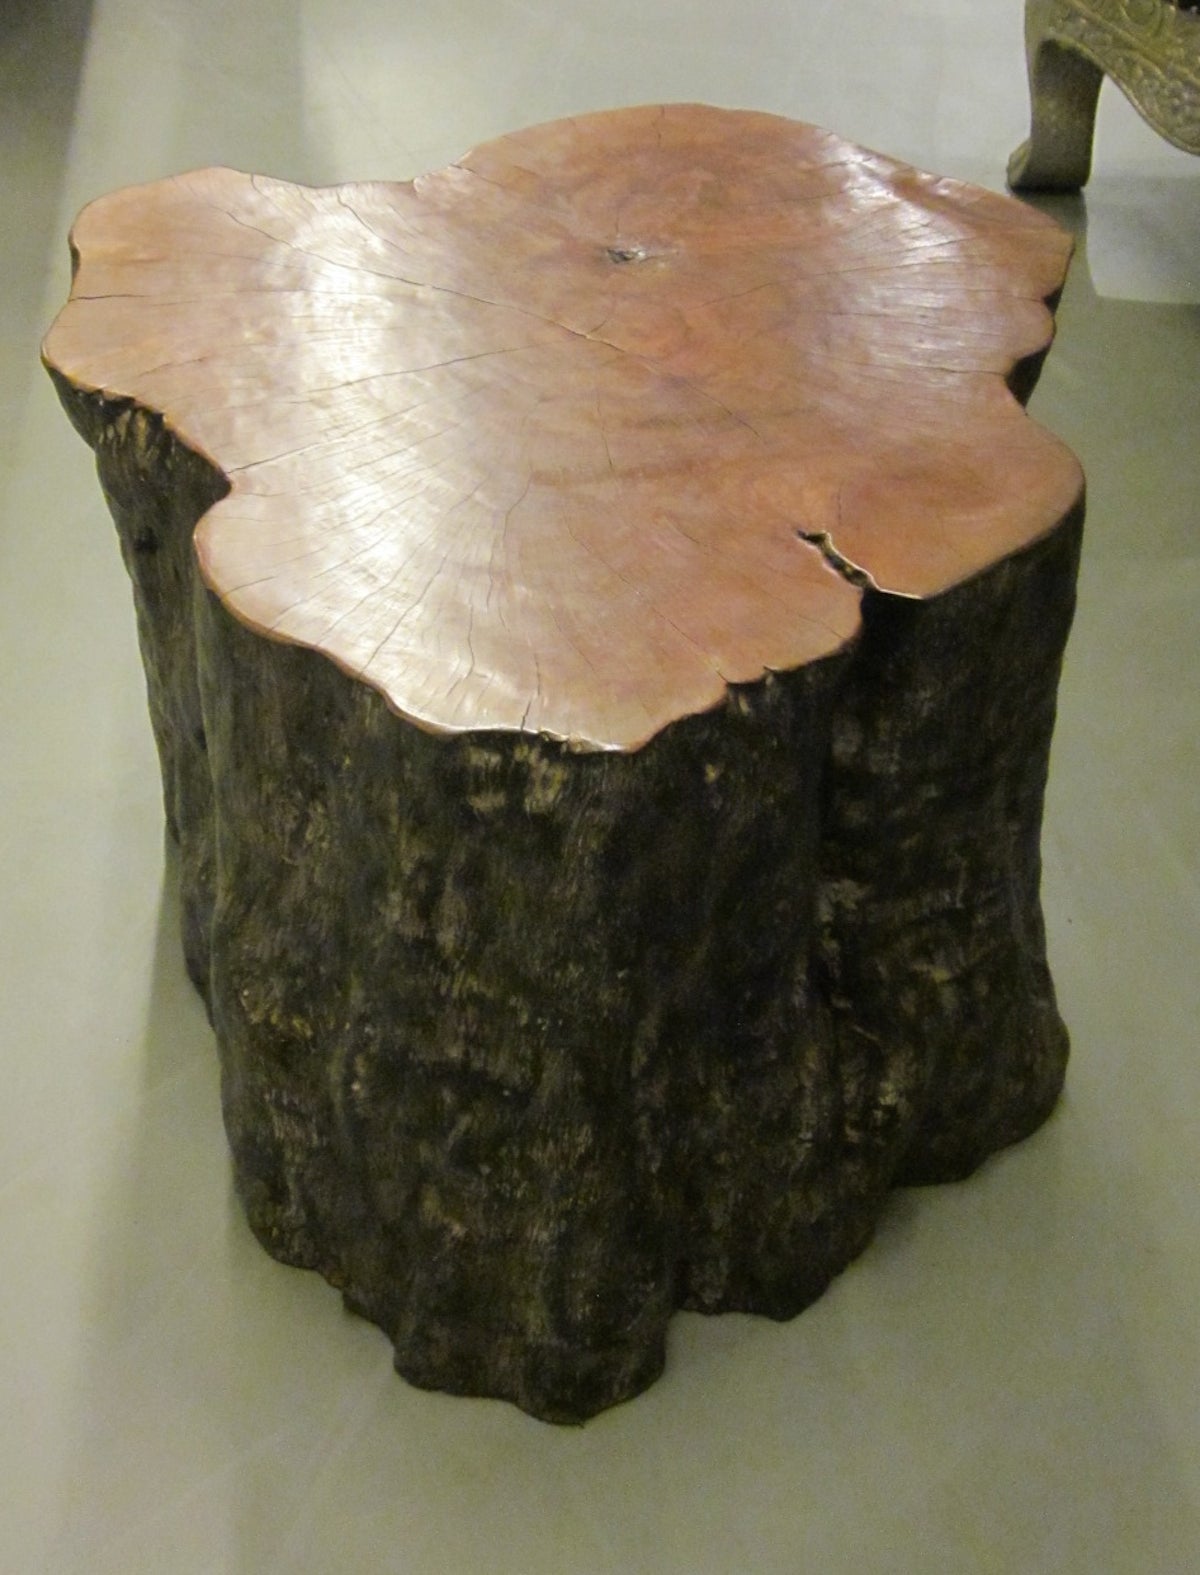 Indonesian prehistoric side table made from Lychee wood.
Arrives in March.